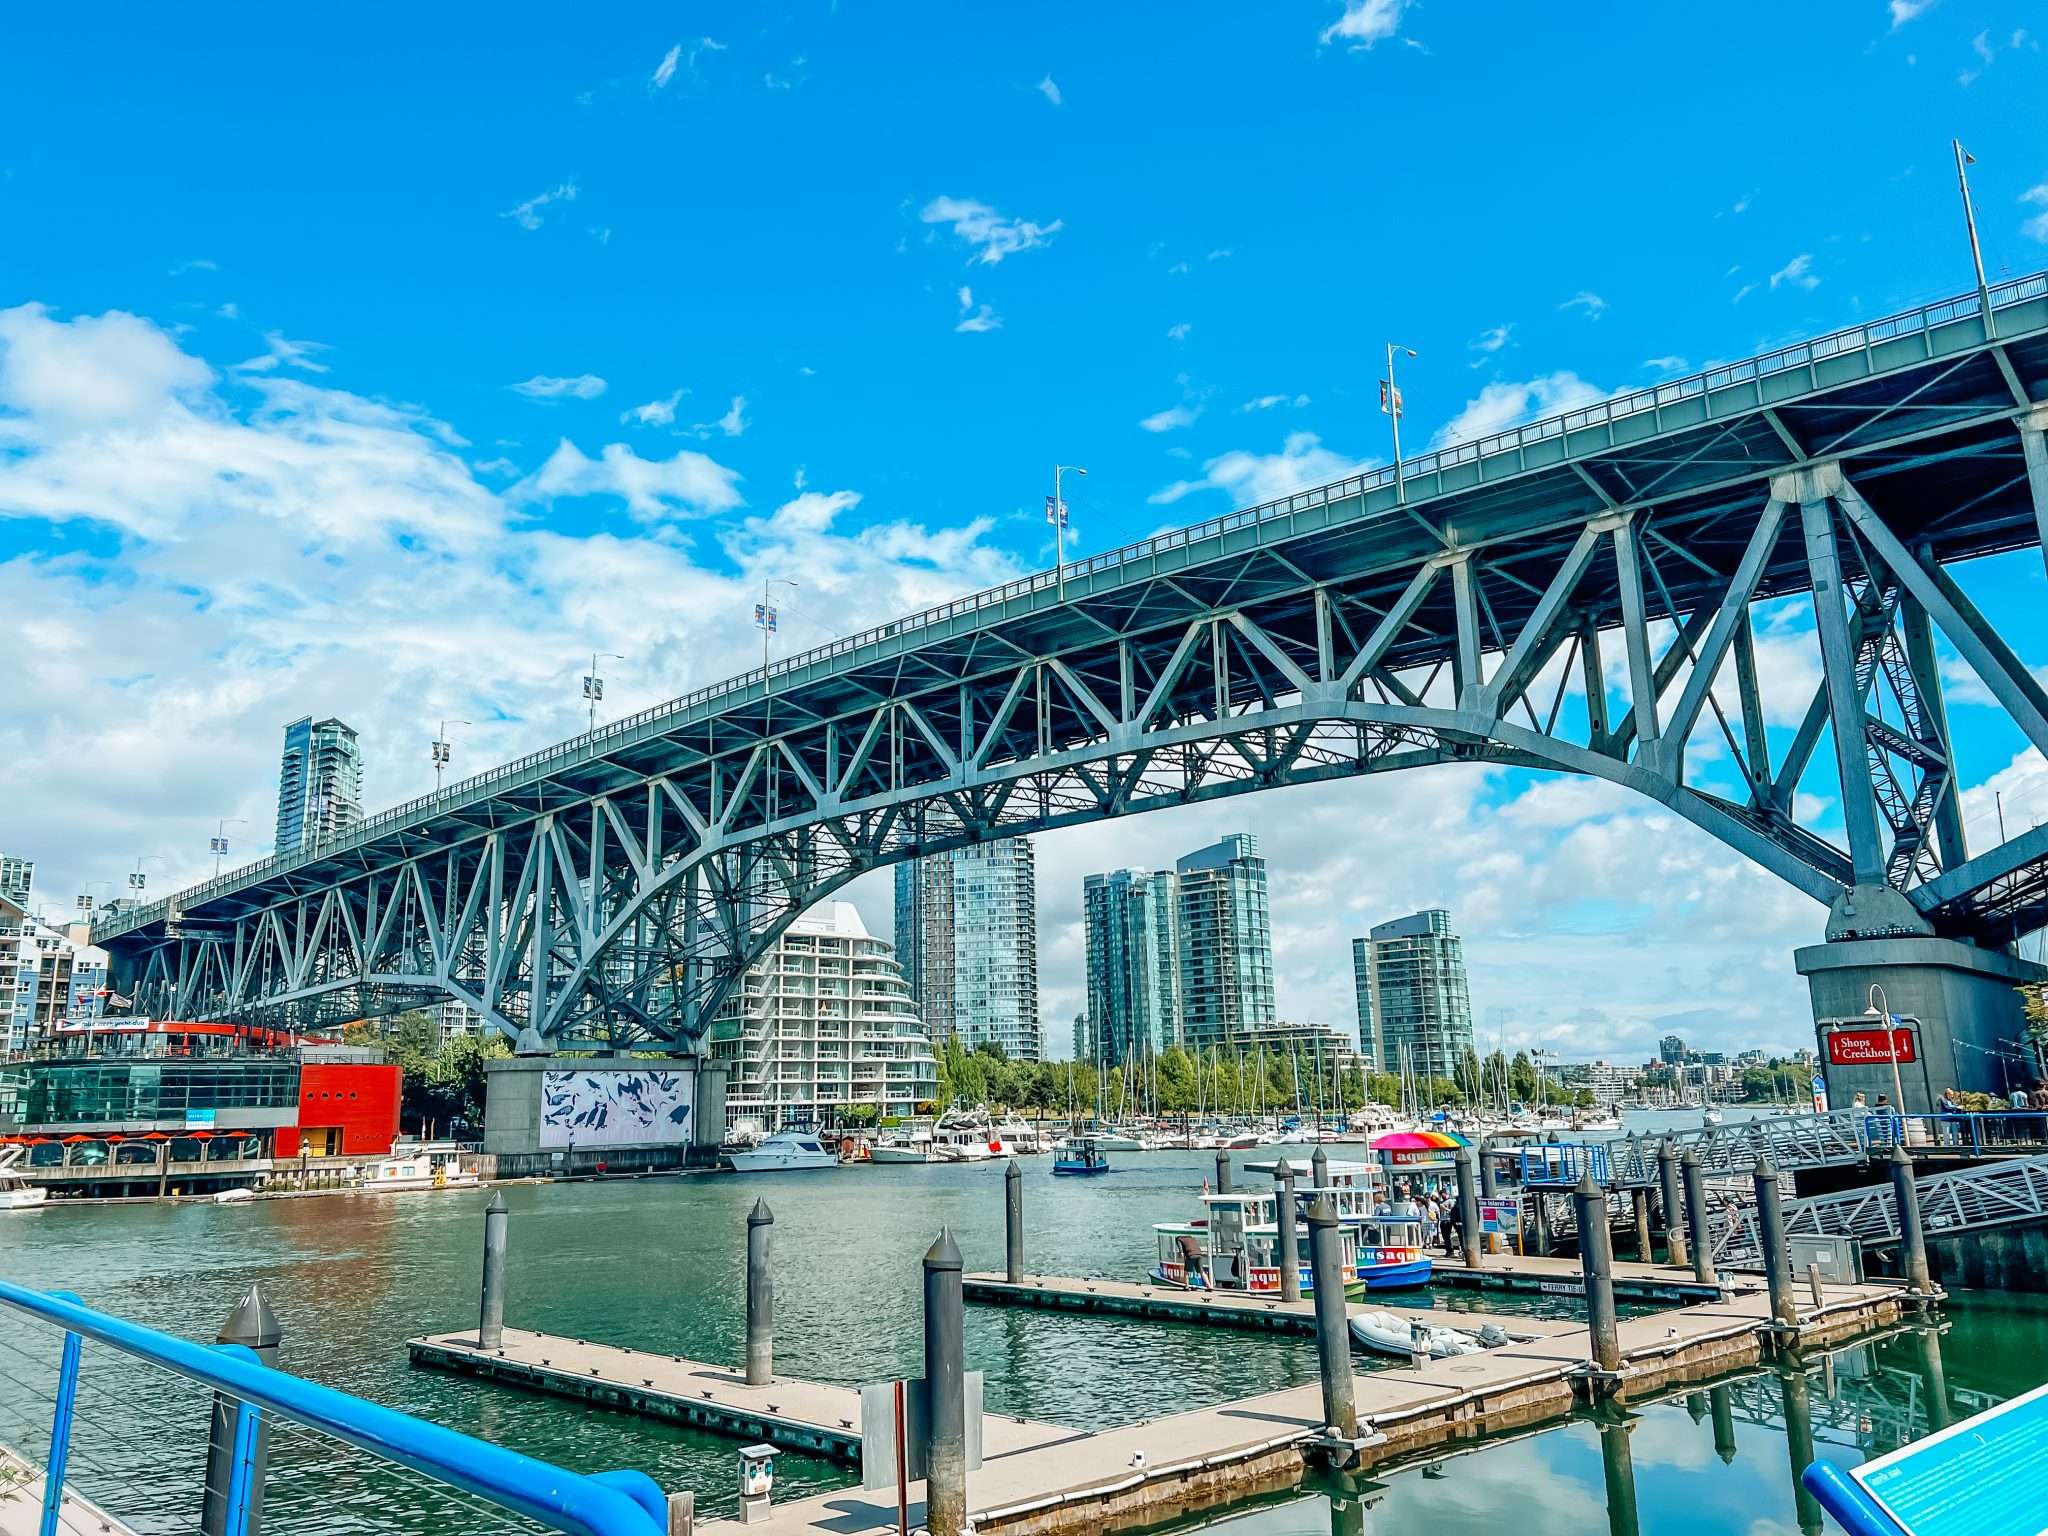 Granville Island, Things to do before your Disney Cruise to Alaska from Vancouver